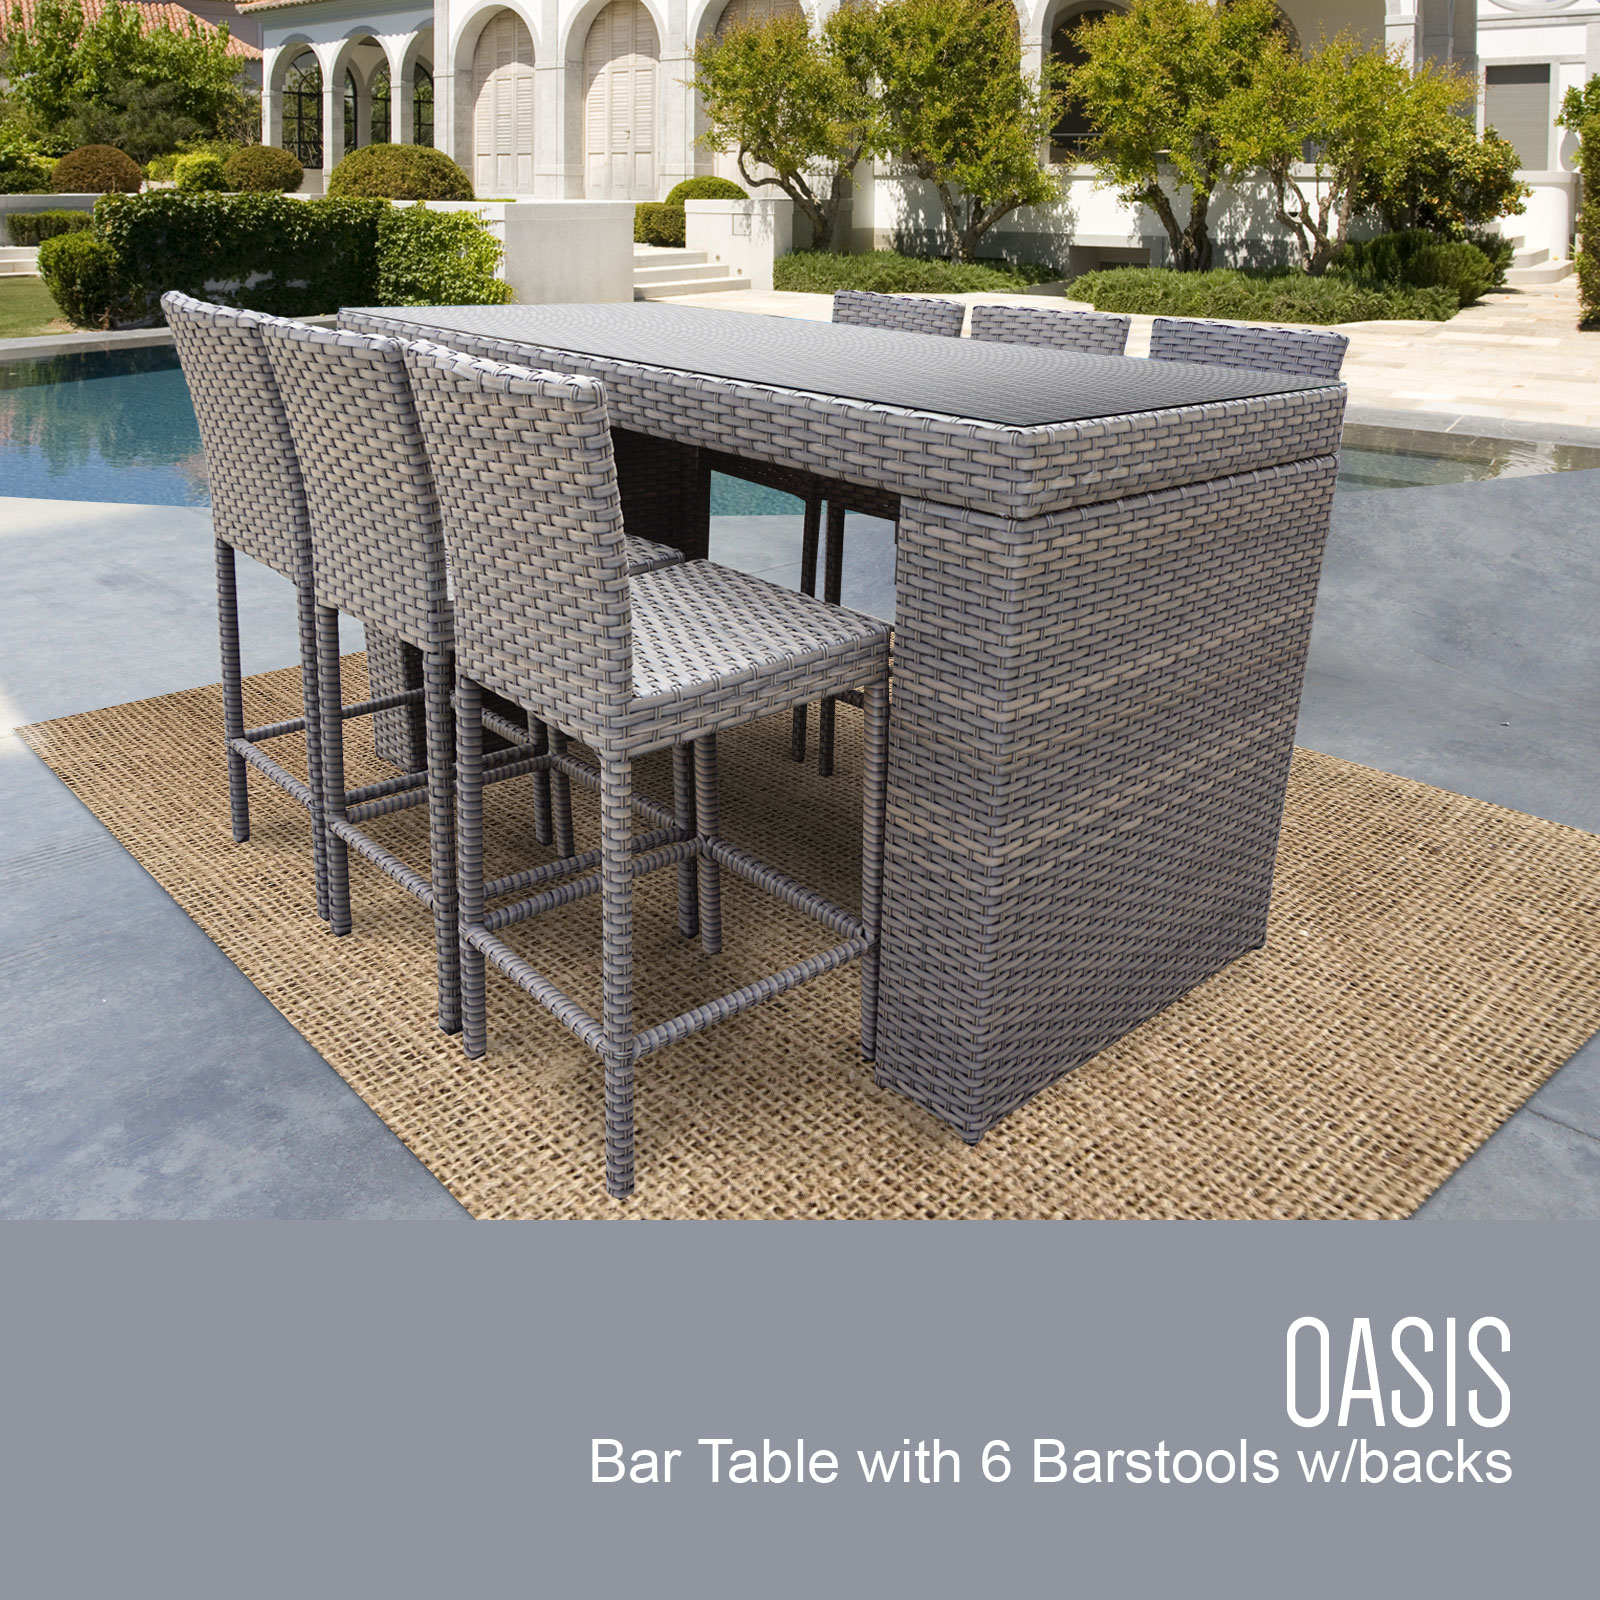 Oasis Bar Table Set With Barstools 7 Piece Outdoor Wicker Patio Furniture